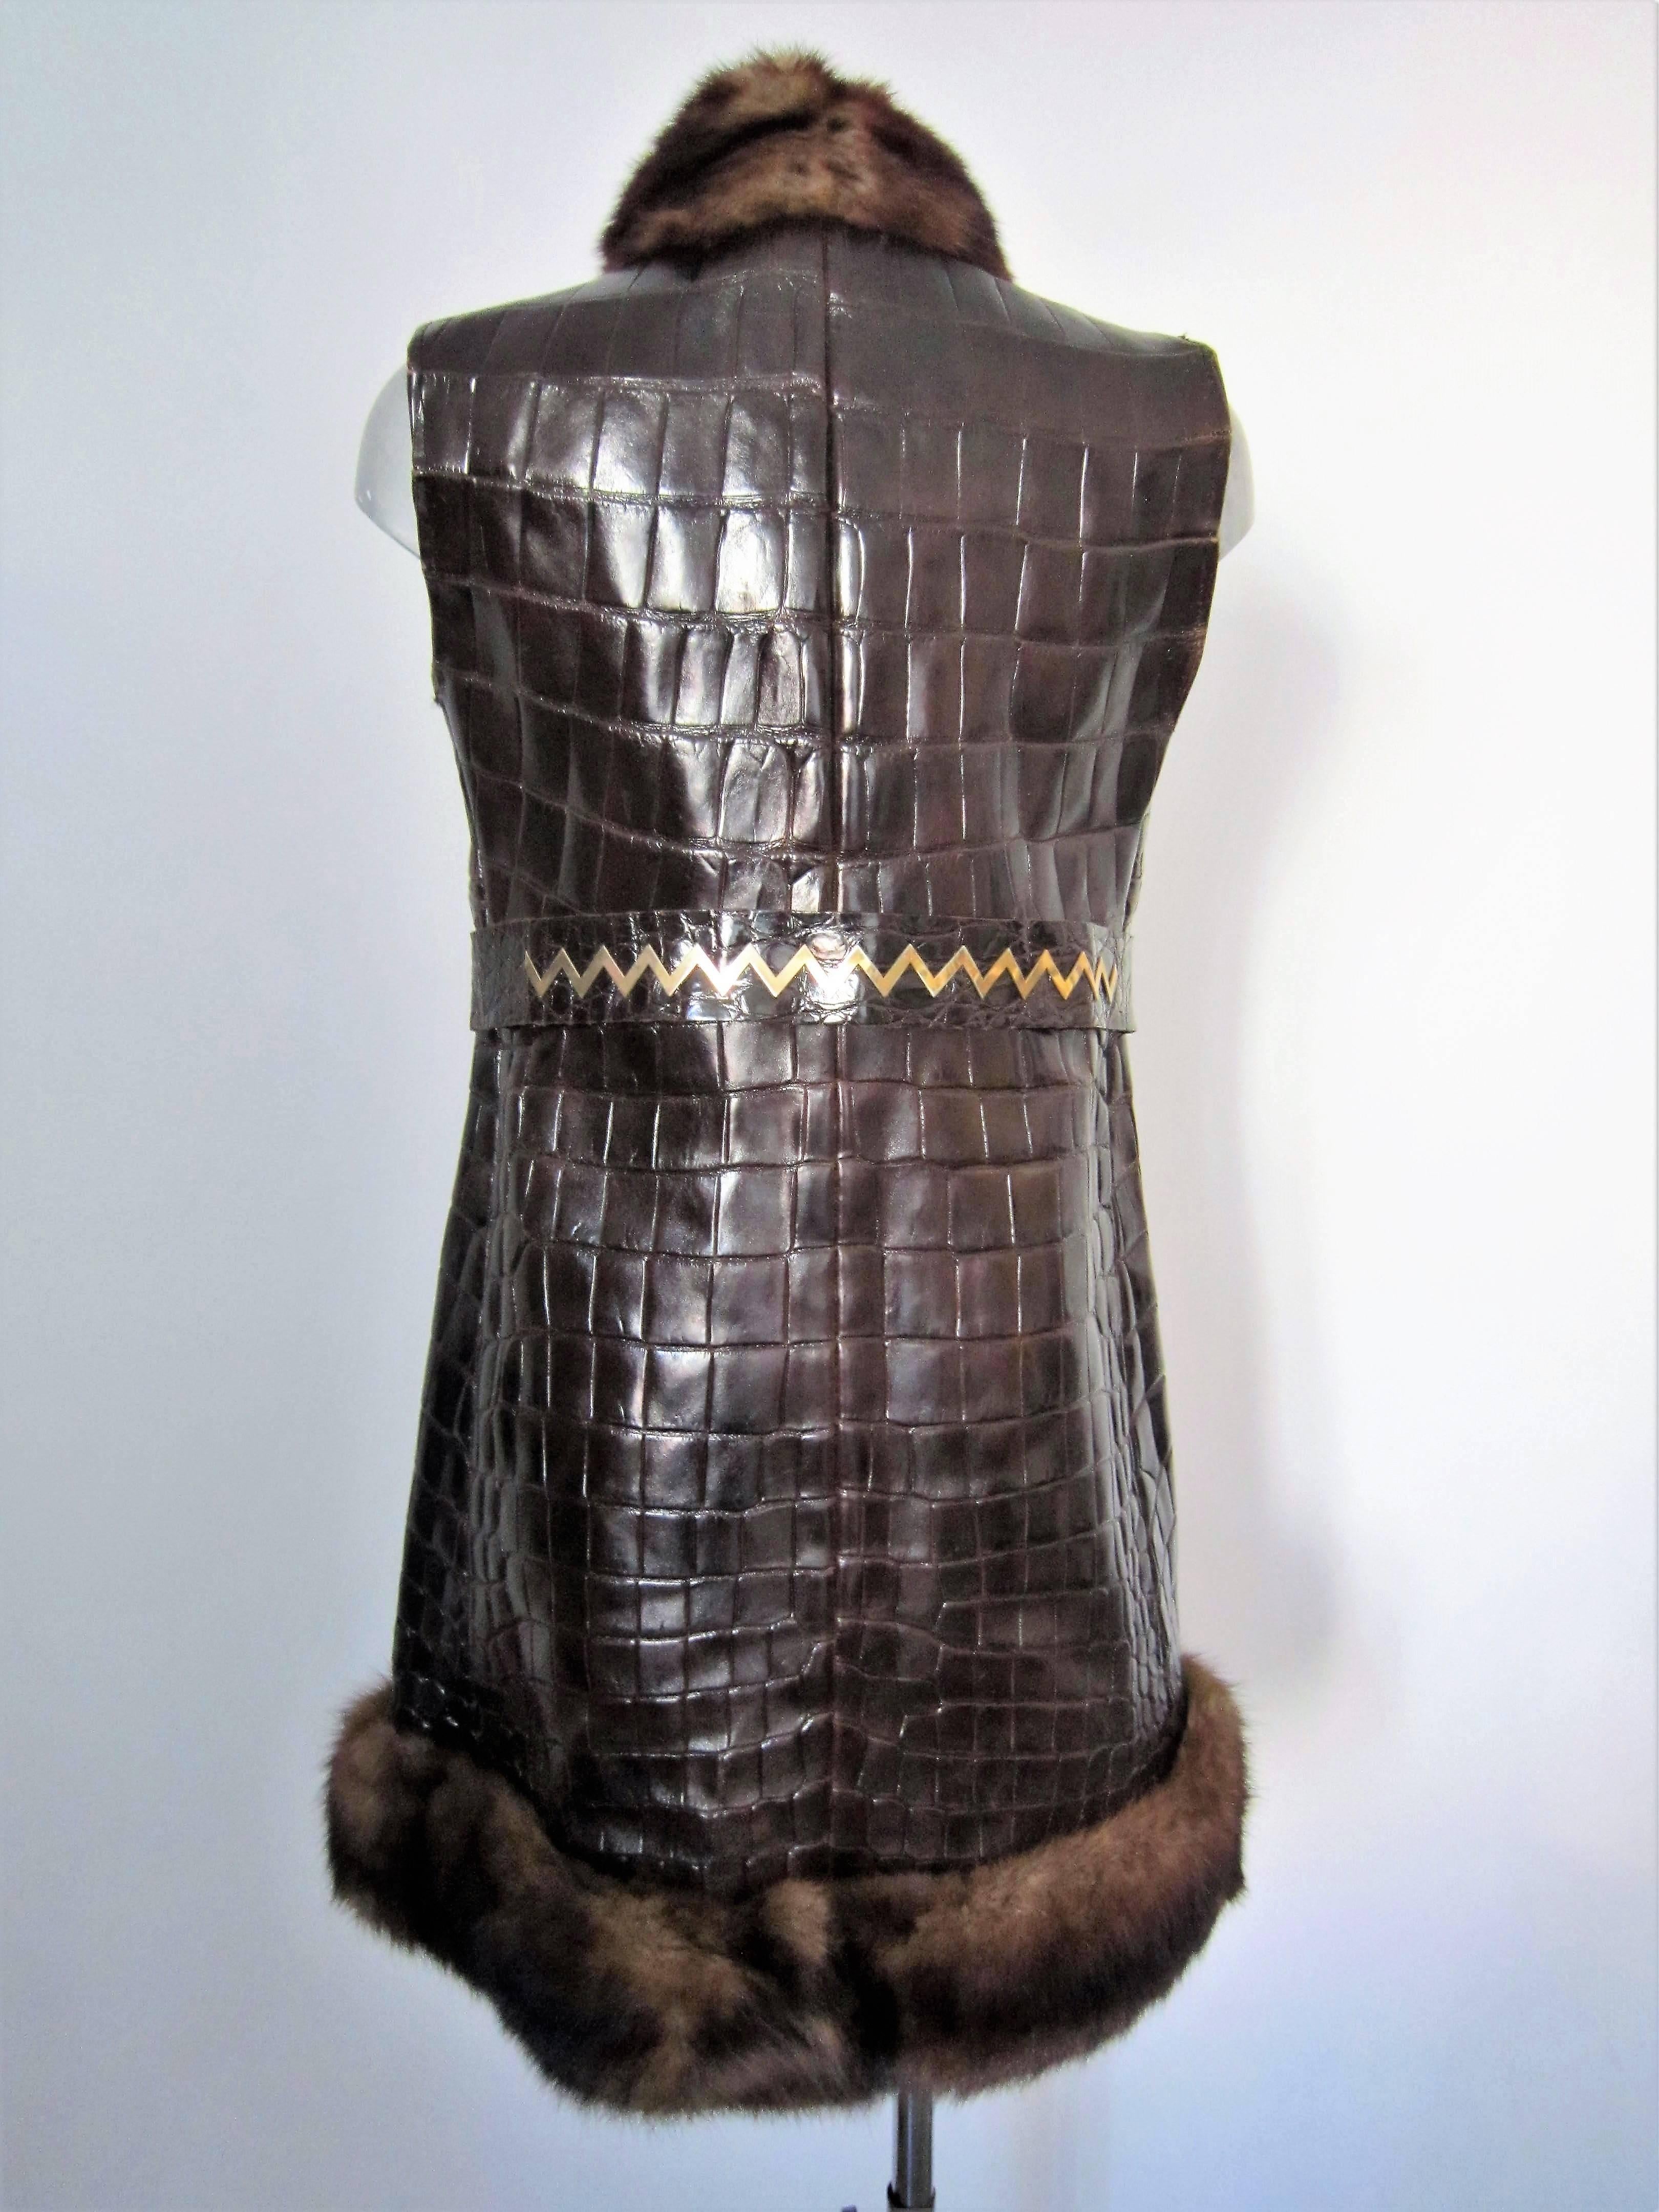 Valentino Couture masterpiece
Valentino Couture crocodile and mink waistcoat, unique piece, exclusive made.
The waistcoat can be wear with or without the belt that features V of Valentino

Size: no size, but it seems to be a 40-42 it

Brand: